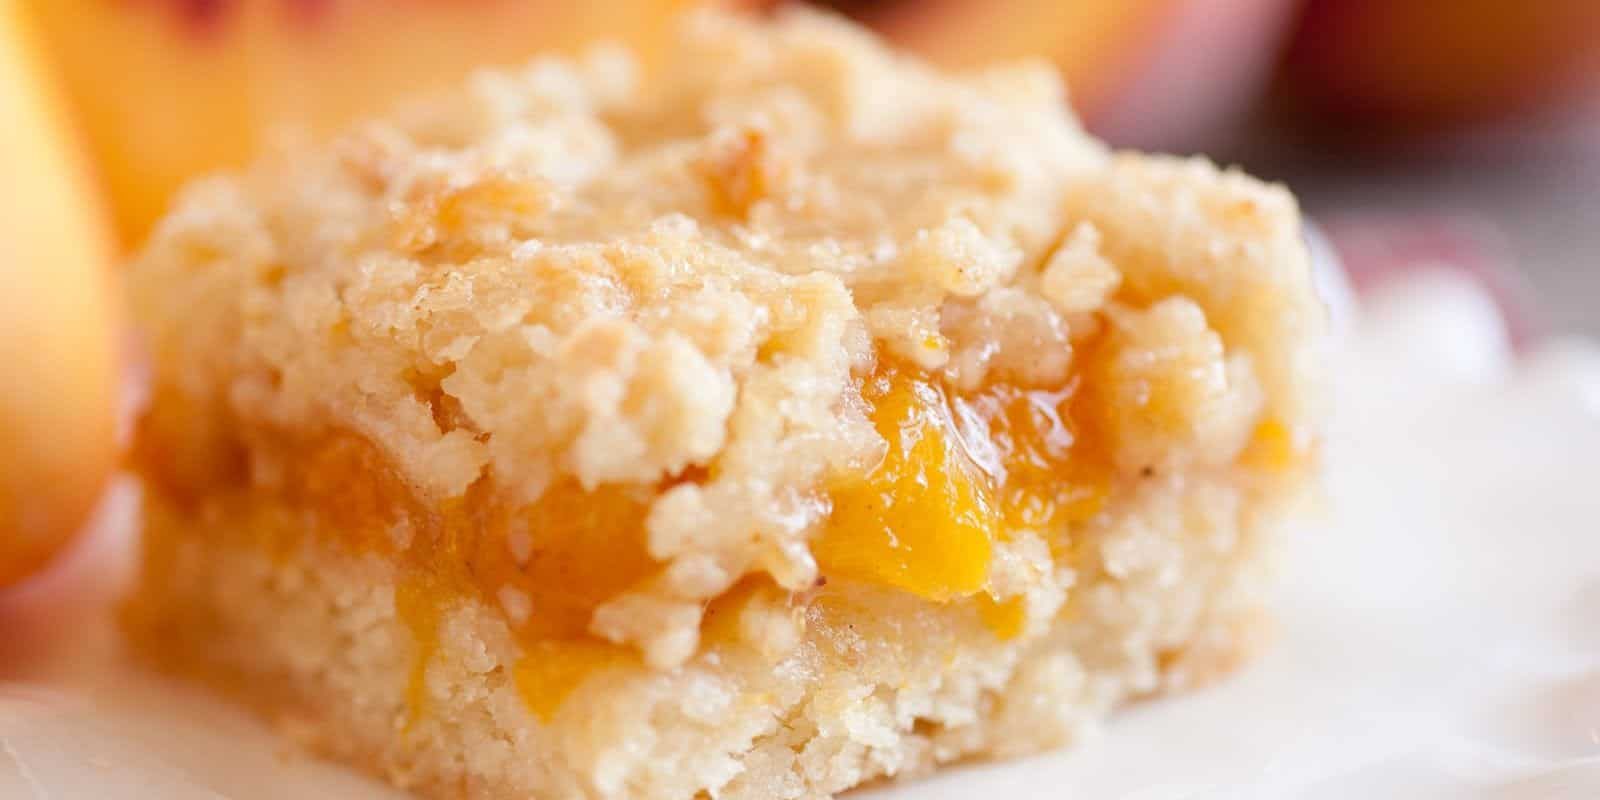 juicy peach cobbler with canned peaches